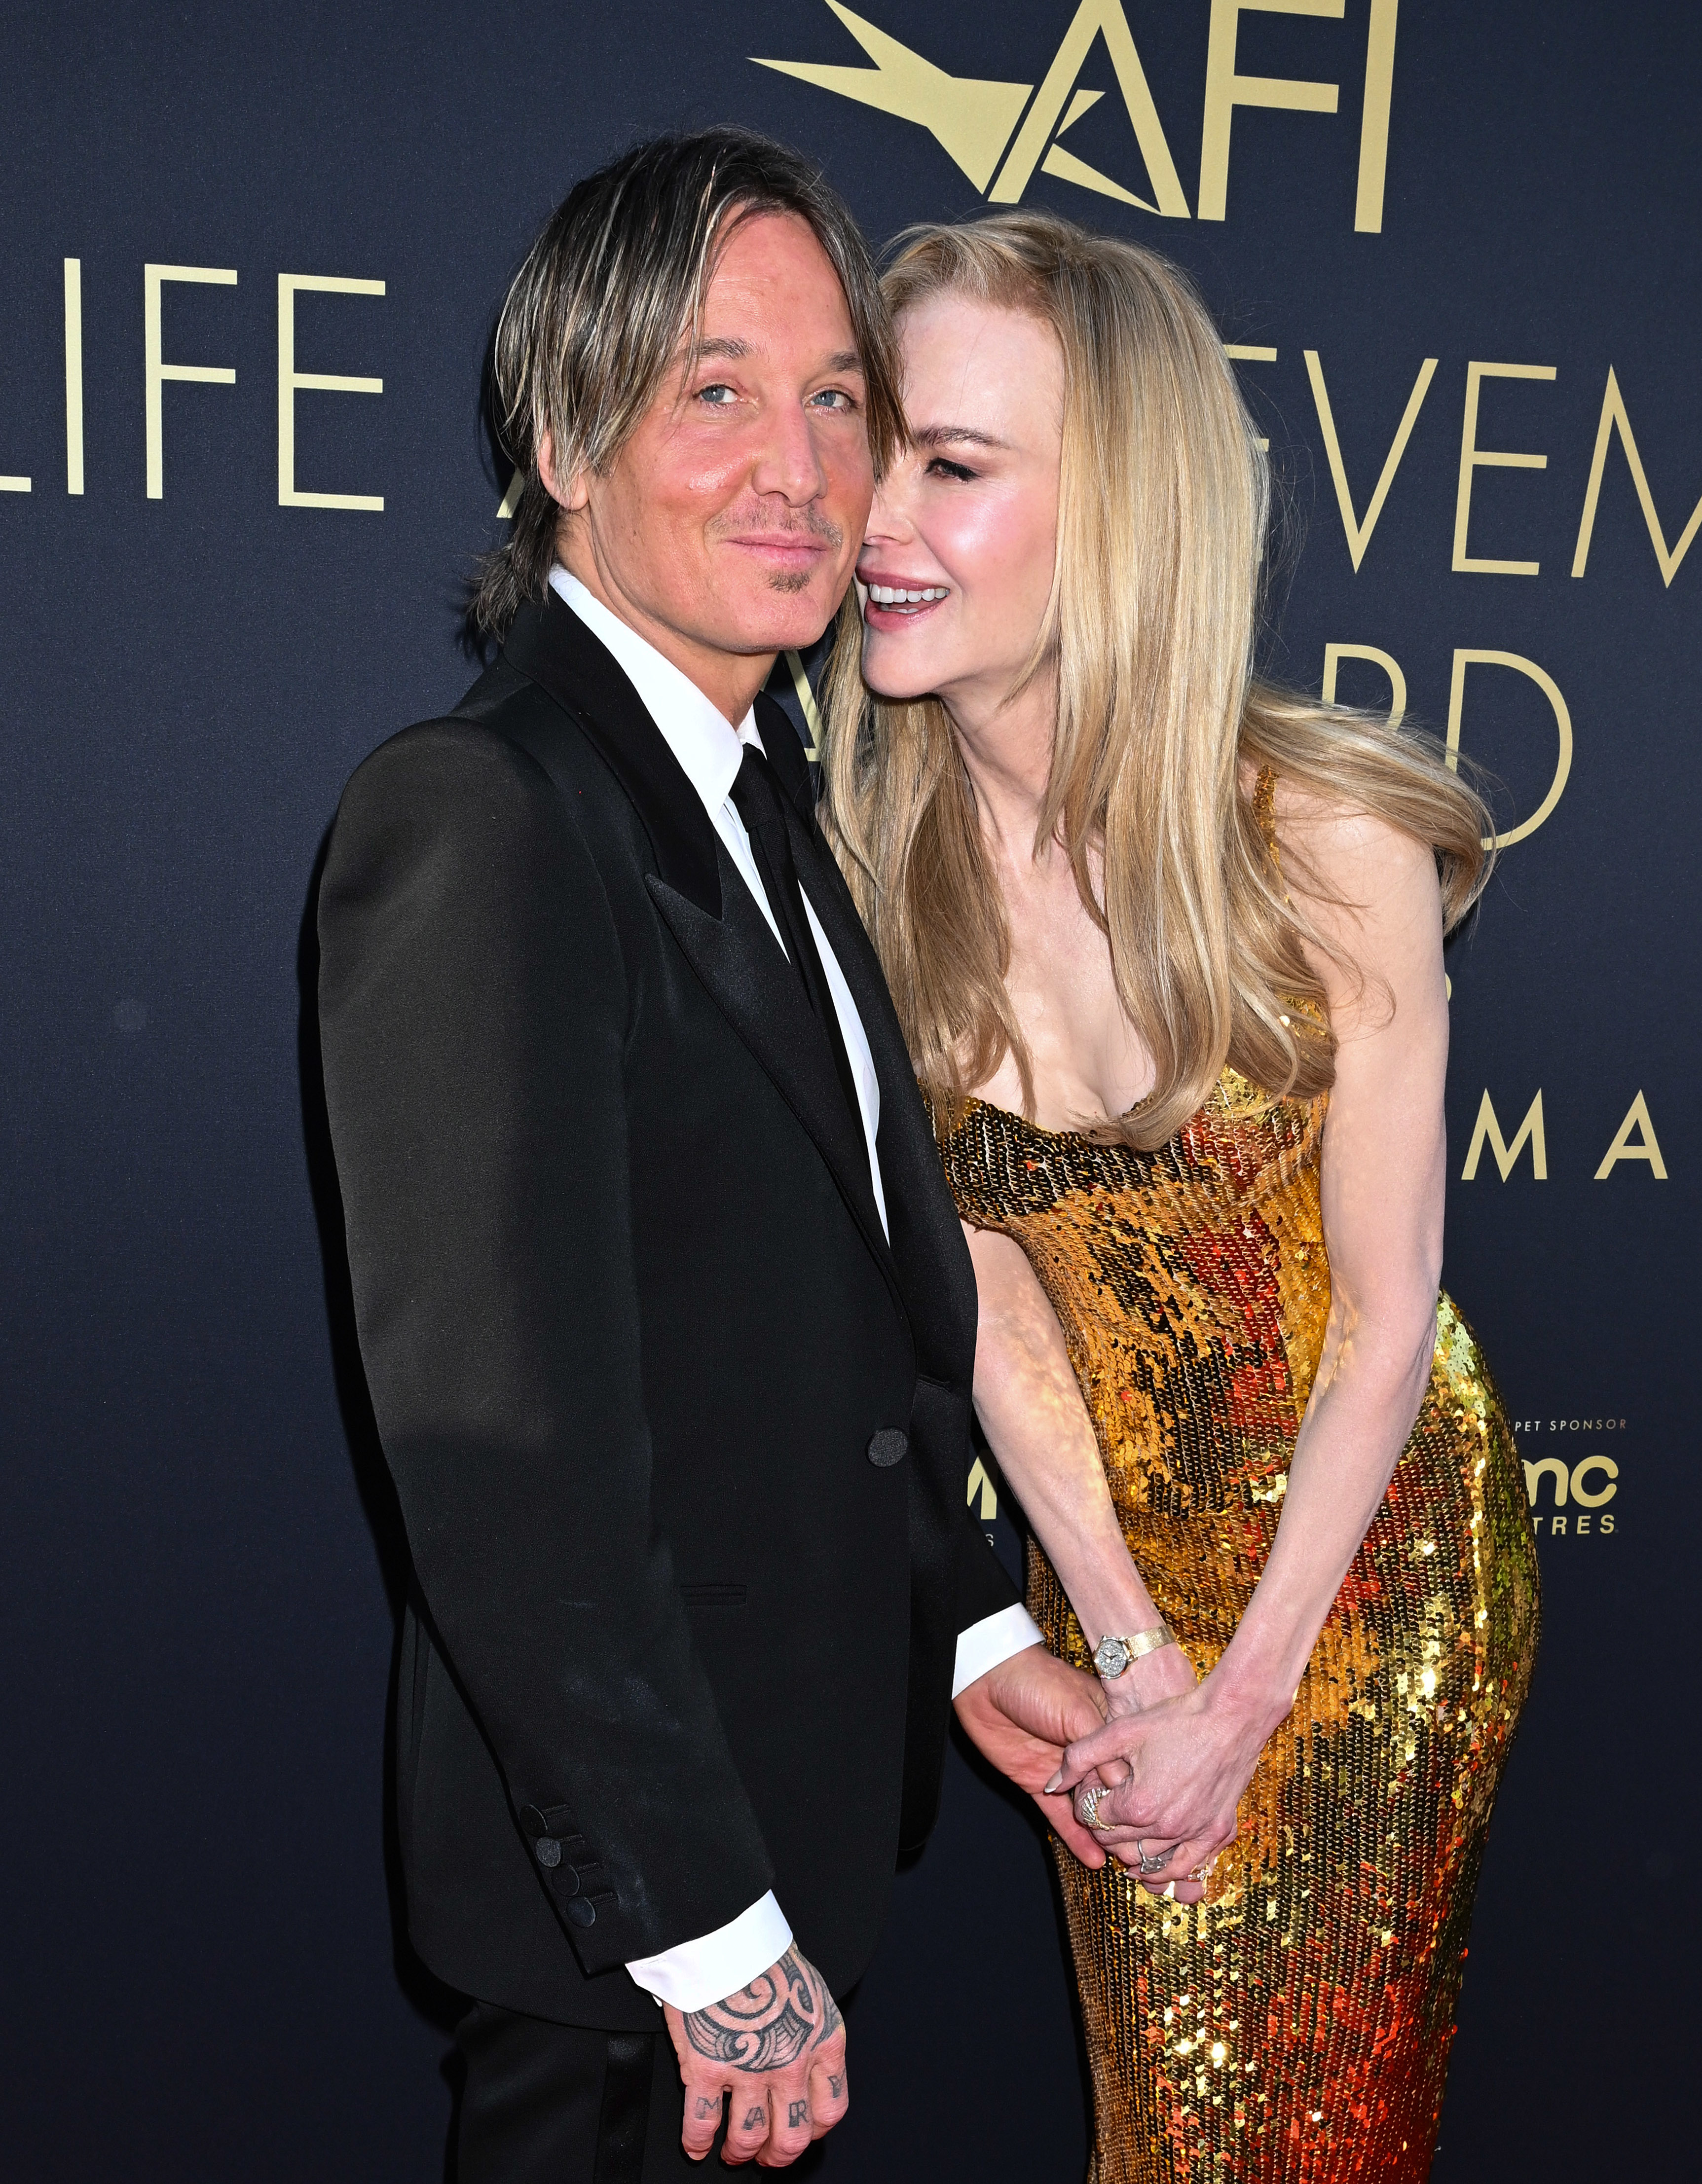 Keith Urban in a black suit with Nicole Kidman in a sequined dress, both smiling at an event